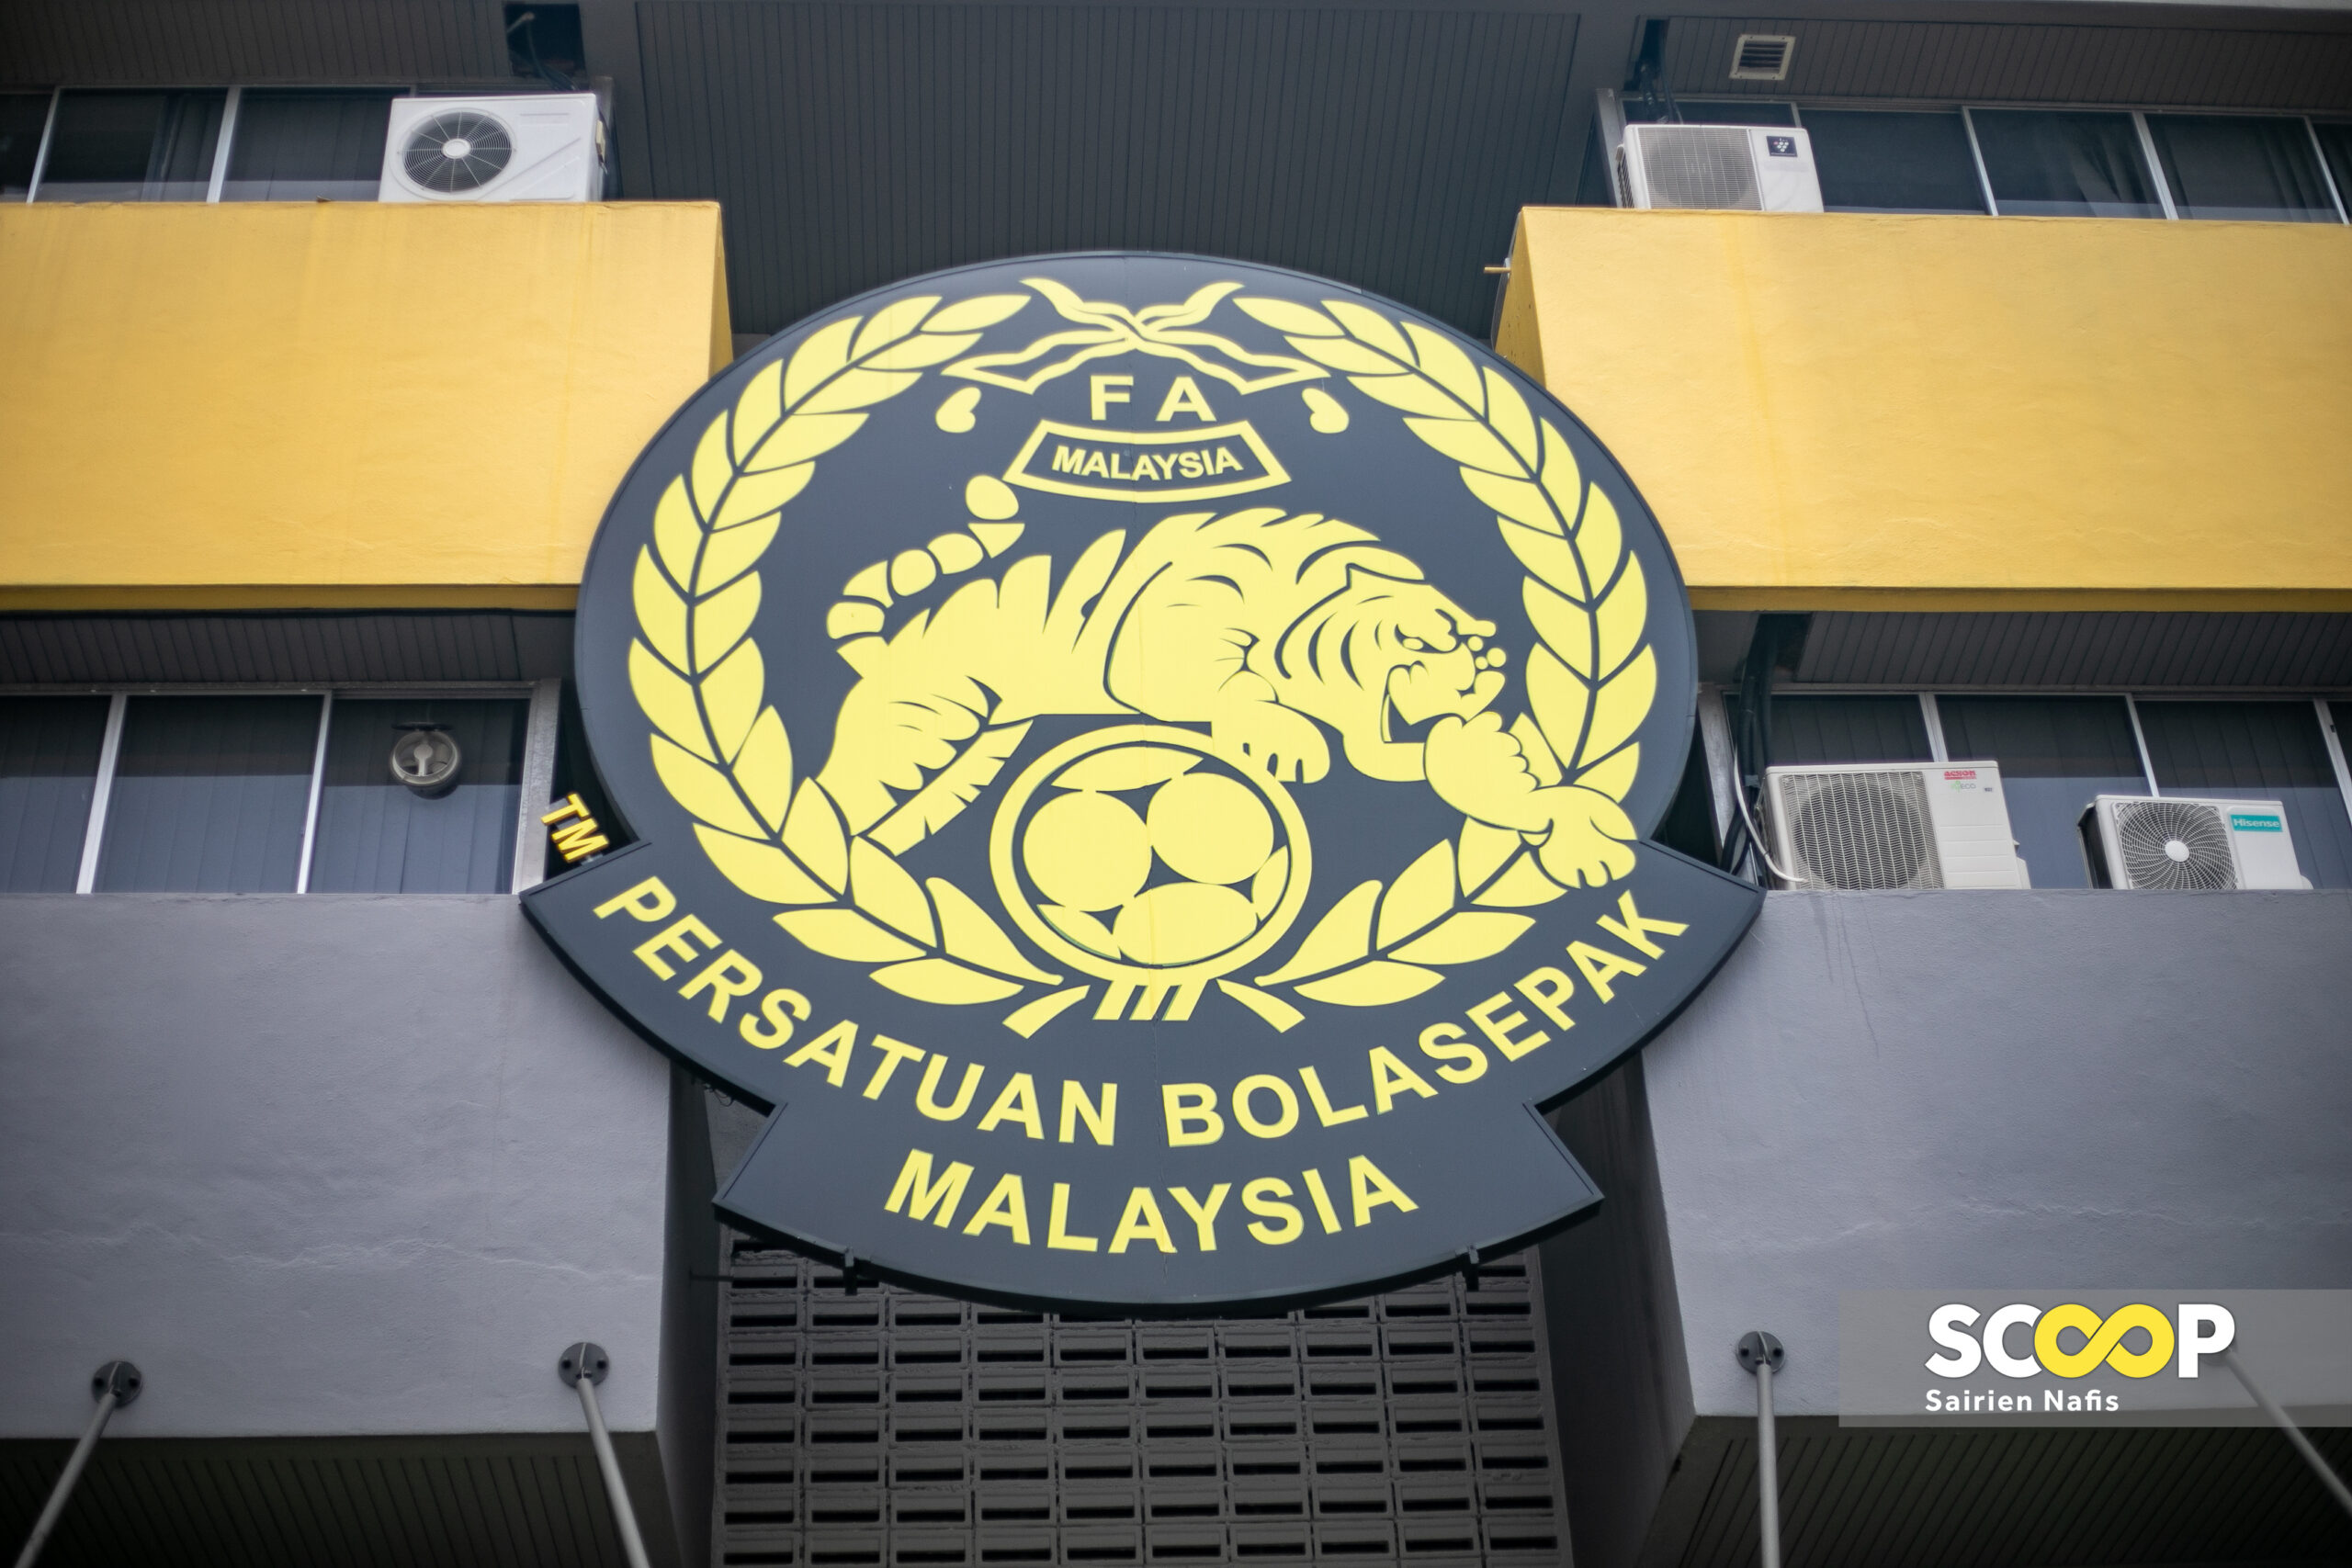 Extra security for national footballers after attacks, says FAM